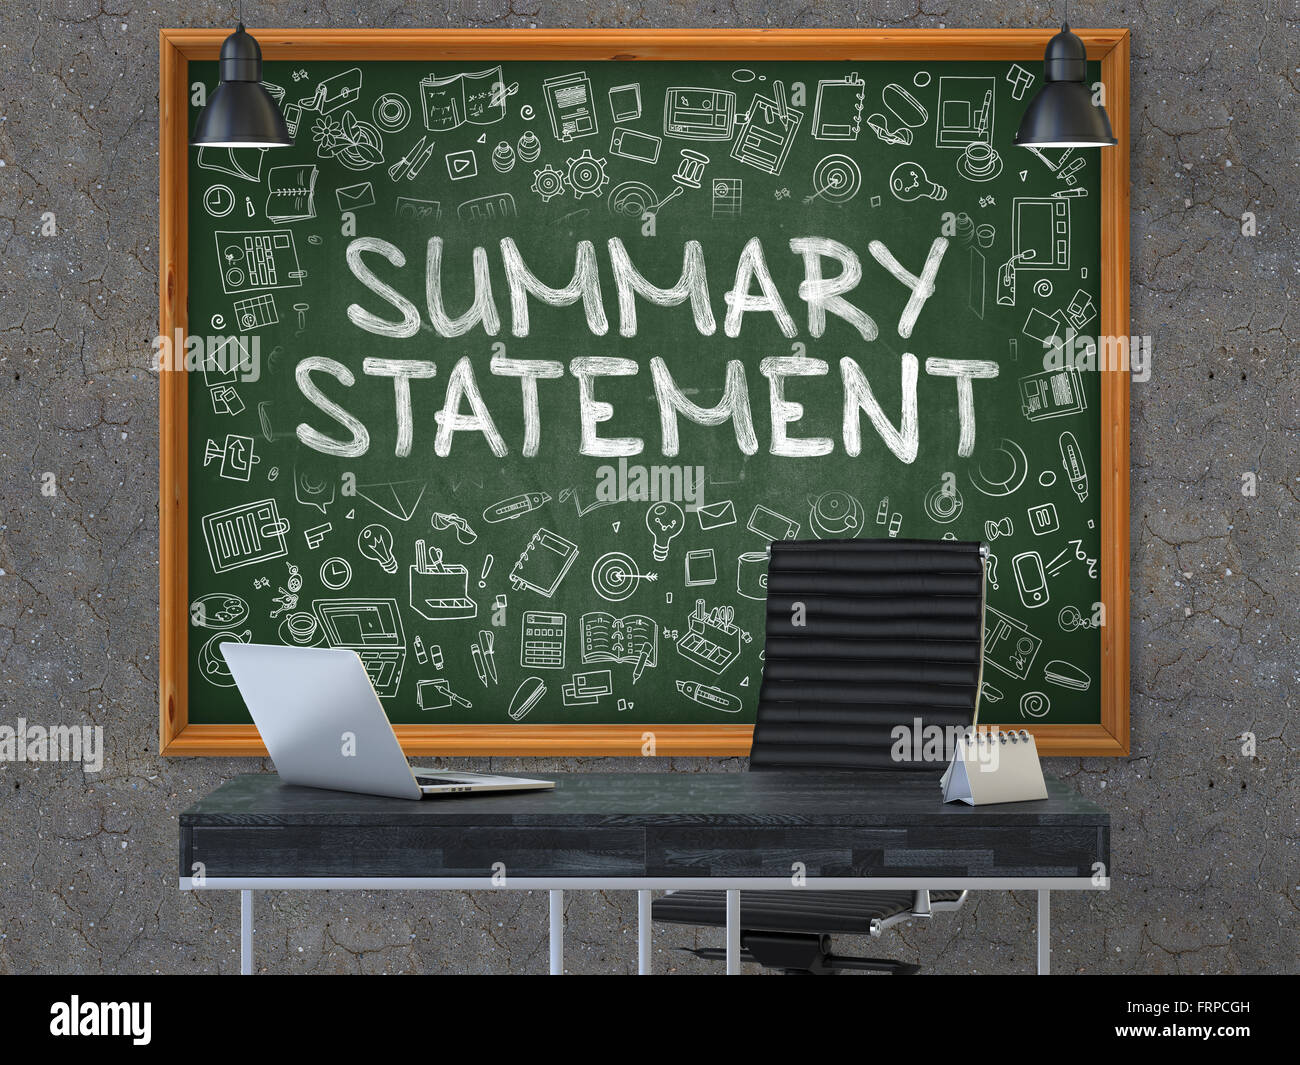 Summary Statement Concept. Doodle Icons on Chalkboard. Stock Photo